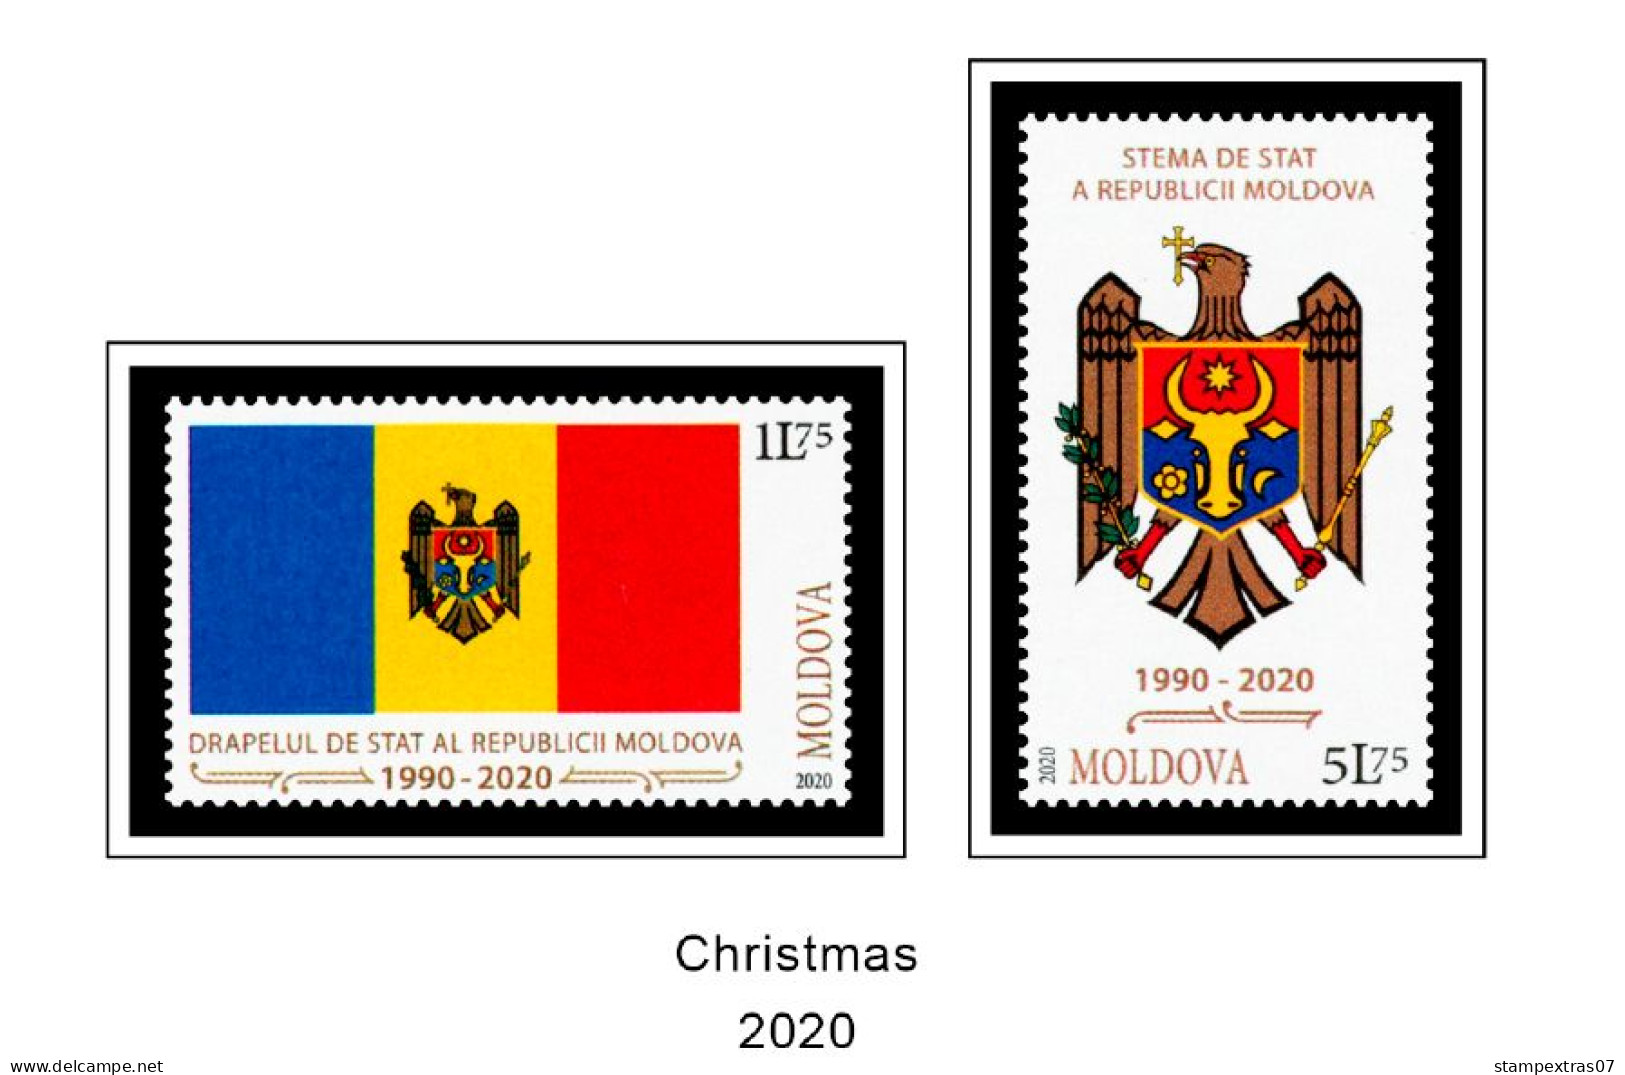 COLOR PRINTED MOLDOVA 2011-2020 STAMP ALBUM PAGES (52 illustrated pages) >> FEUILLES ALBUM